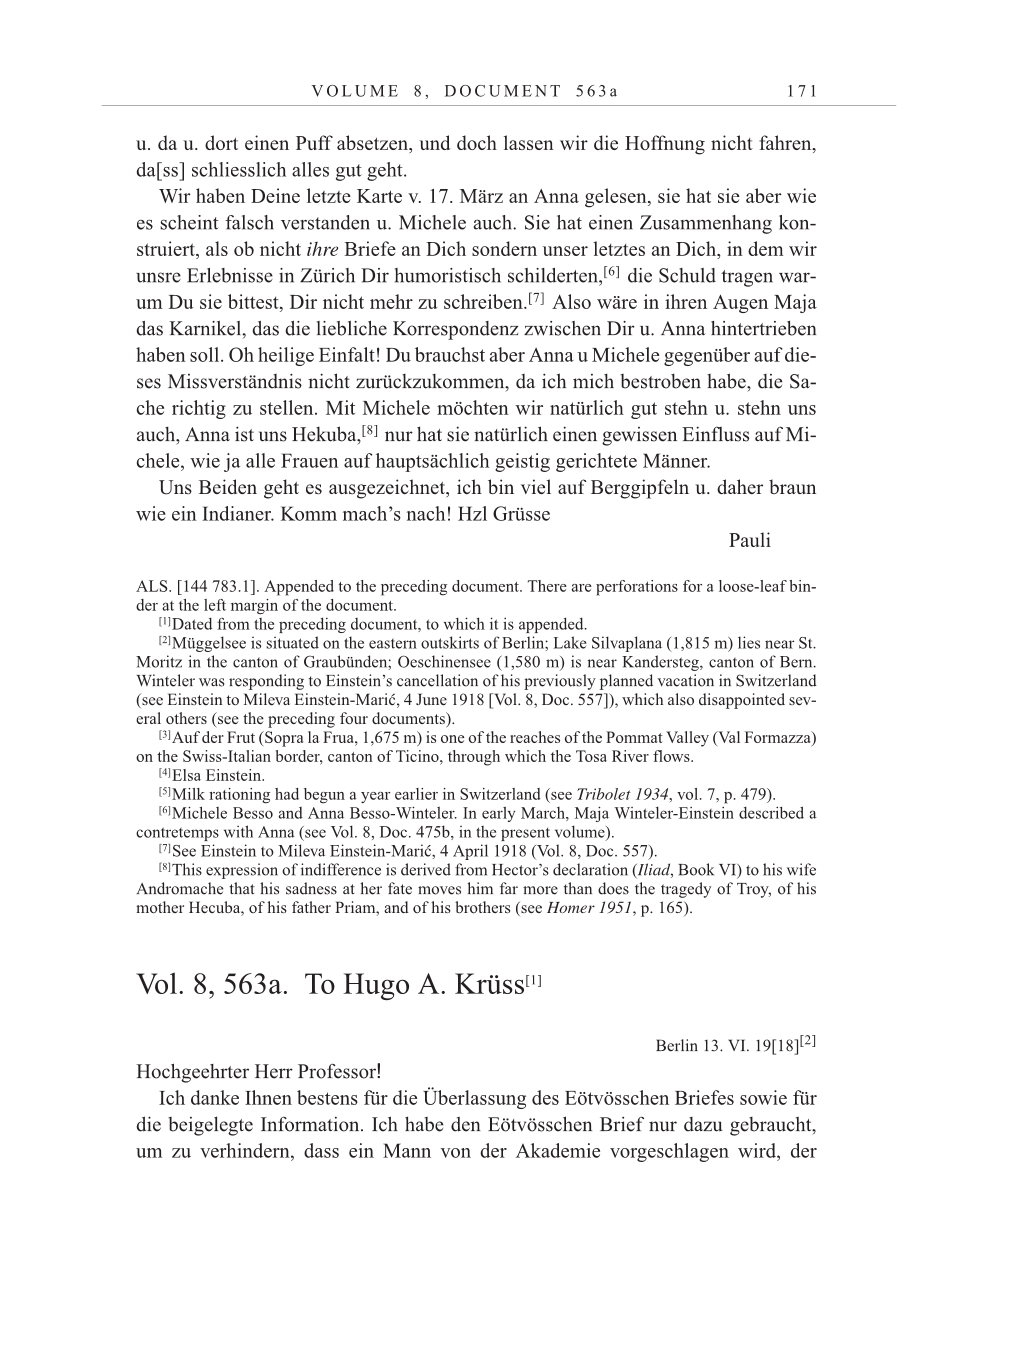 Volume 10: The Berlin Years: Correspondence May-December 1920 / Supplementary Correspondence 1909-1920 page 171